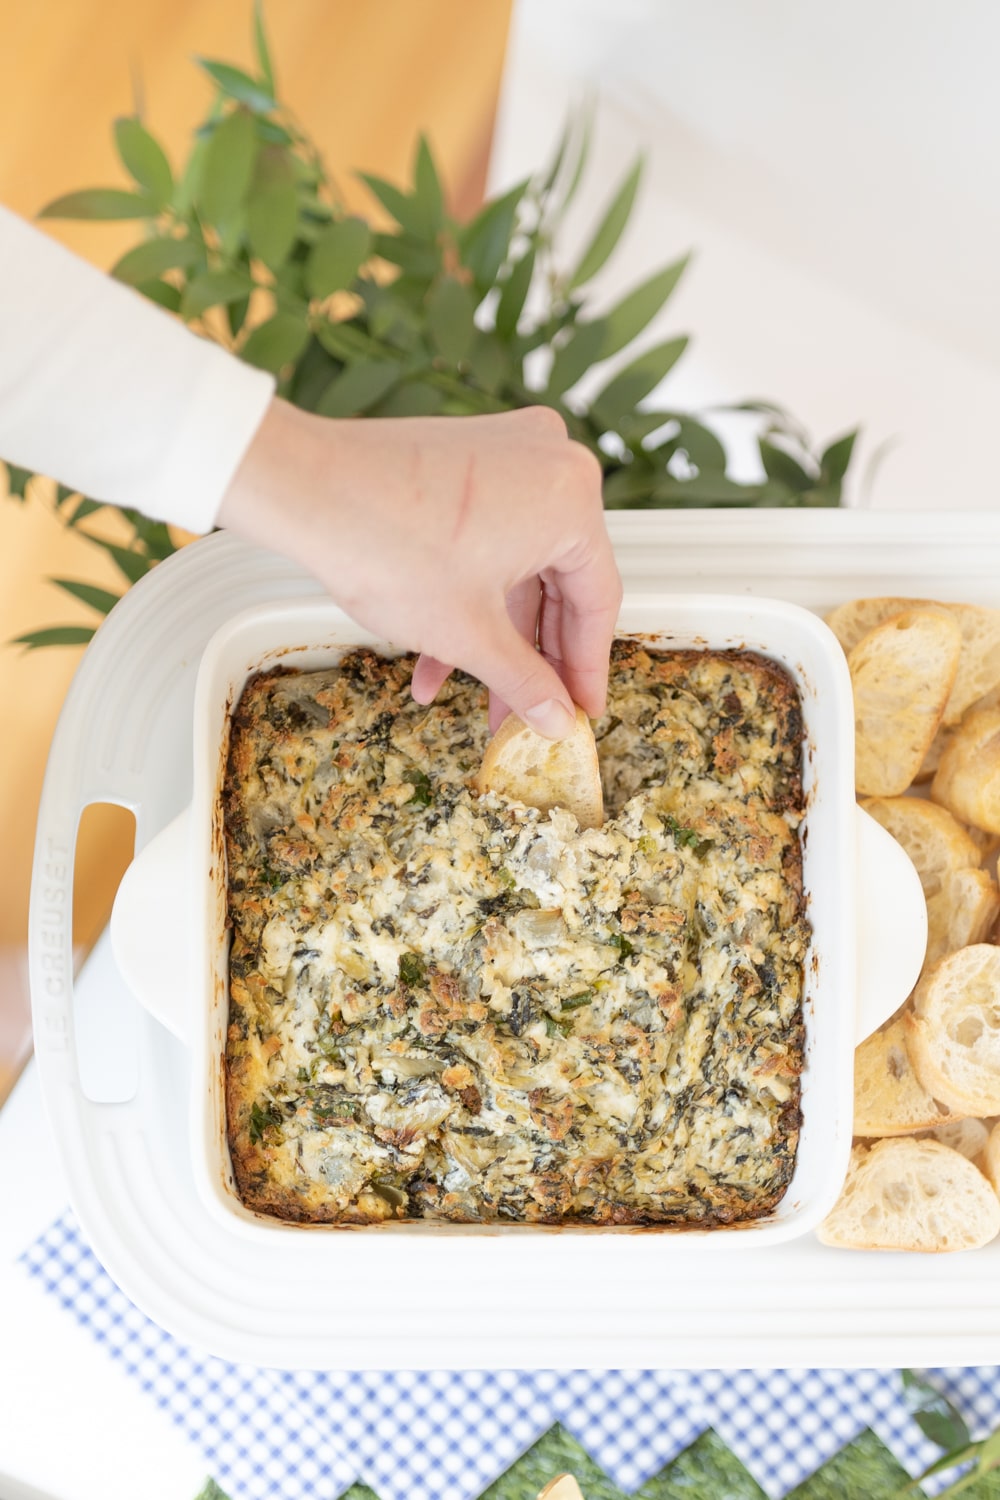 Baked spinach dip recipe by blogger Stephanie Ziajka on Diary of a Debutante